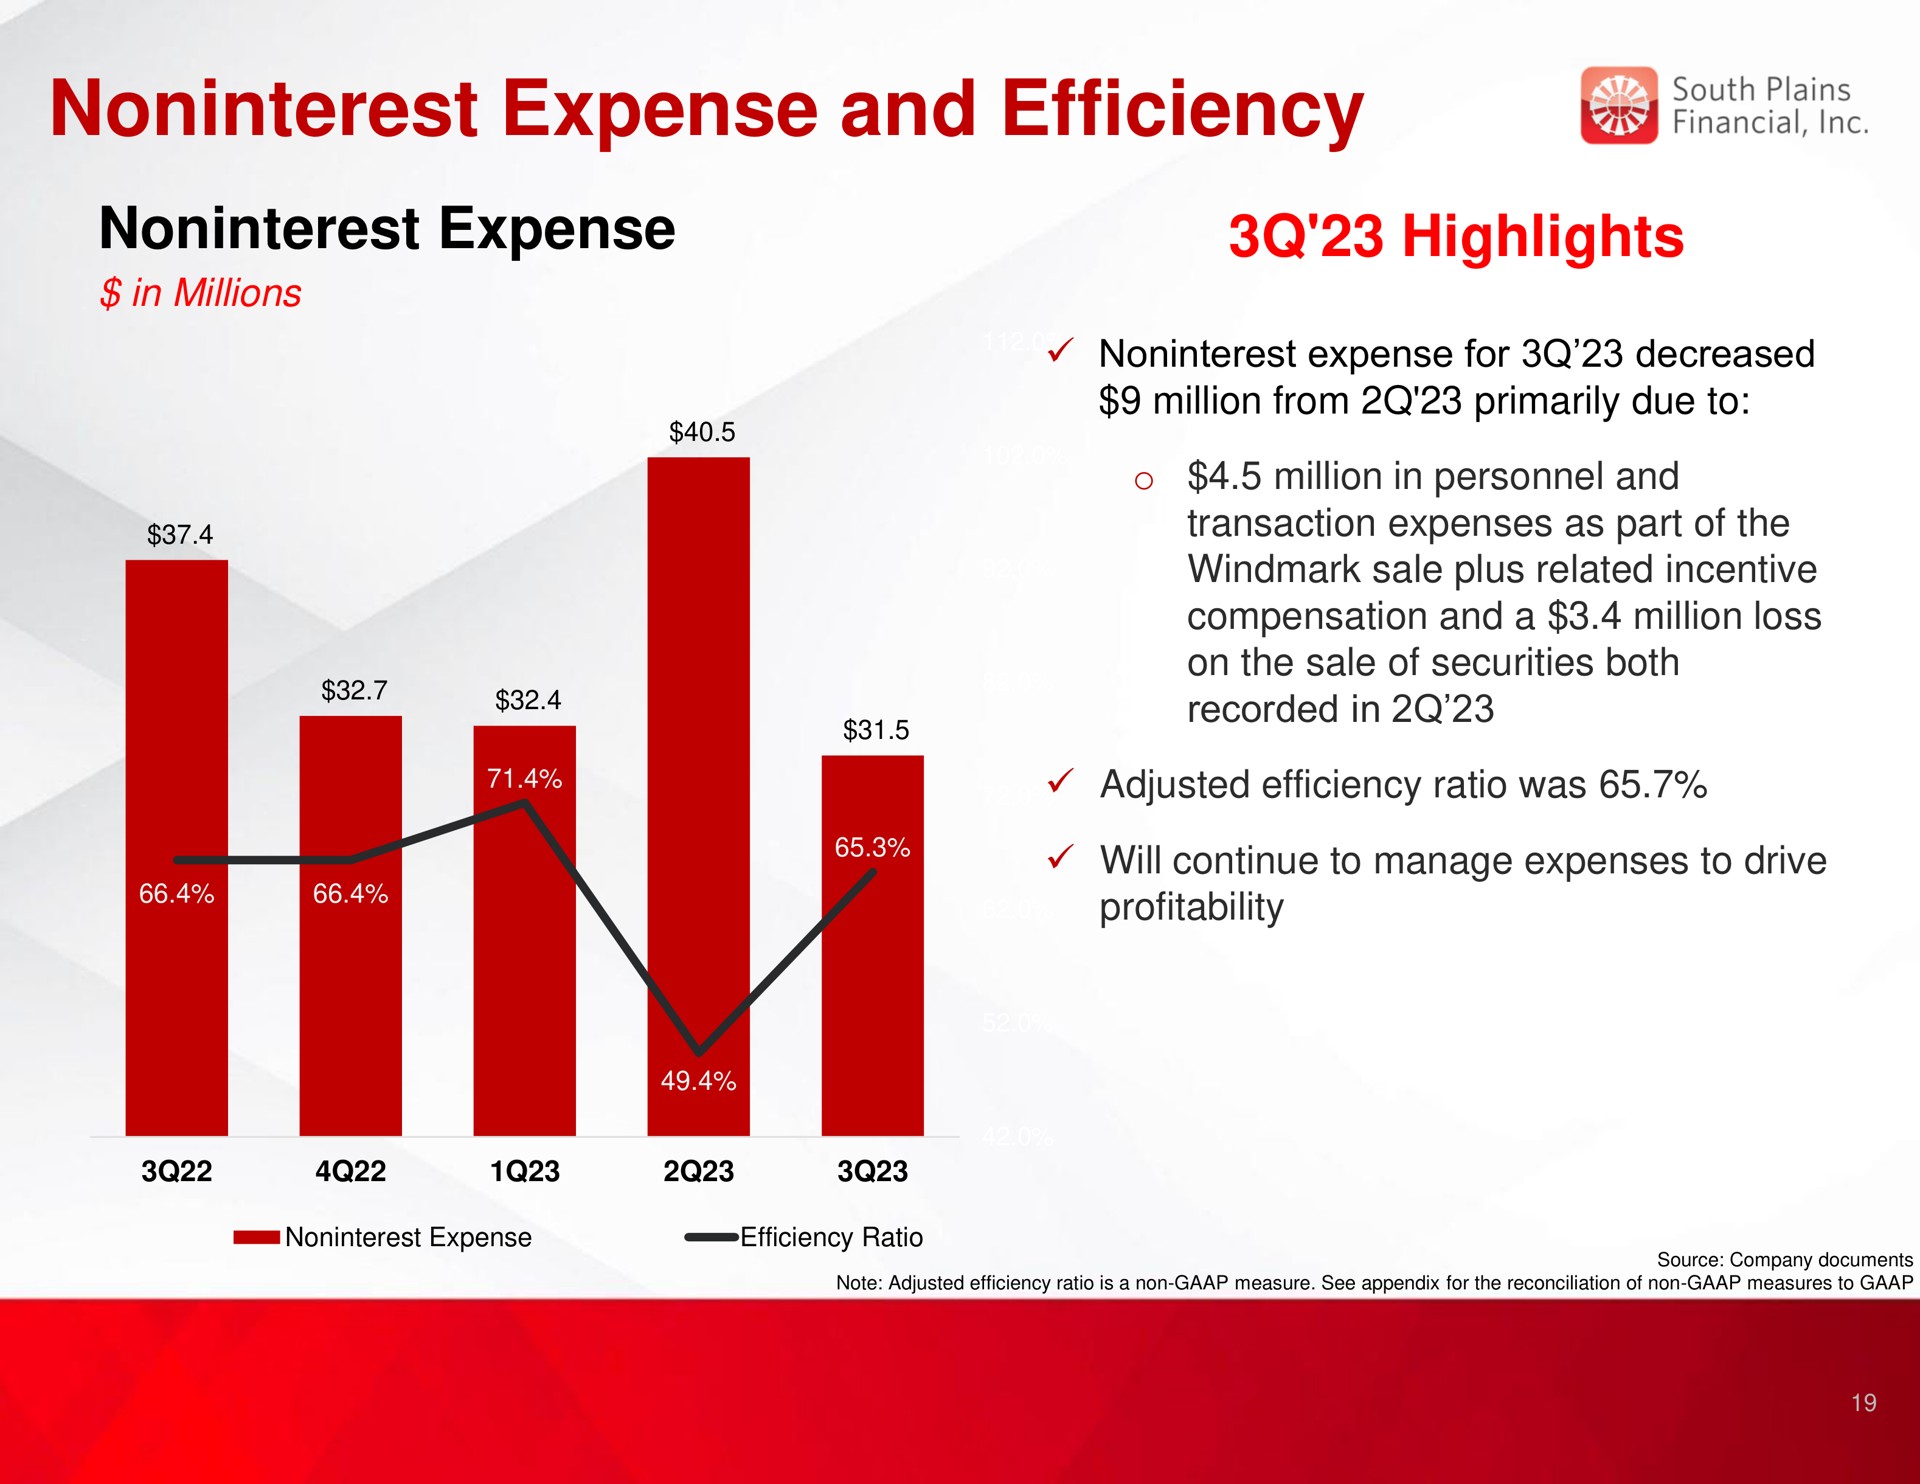 expense and efficiency expense highlights | South Plains Financial